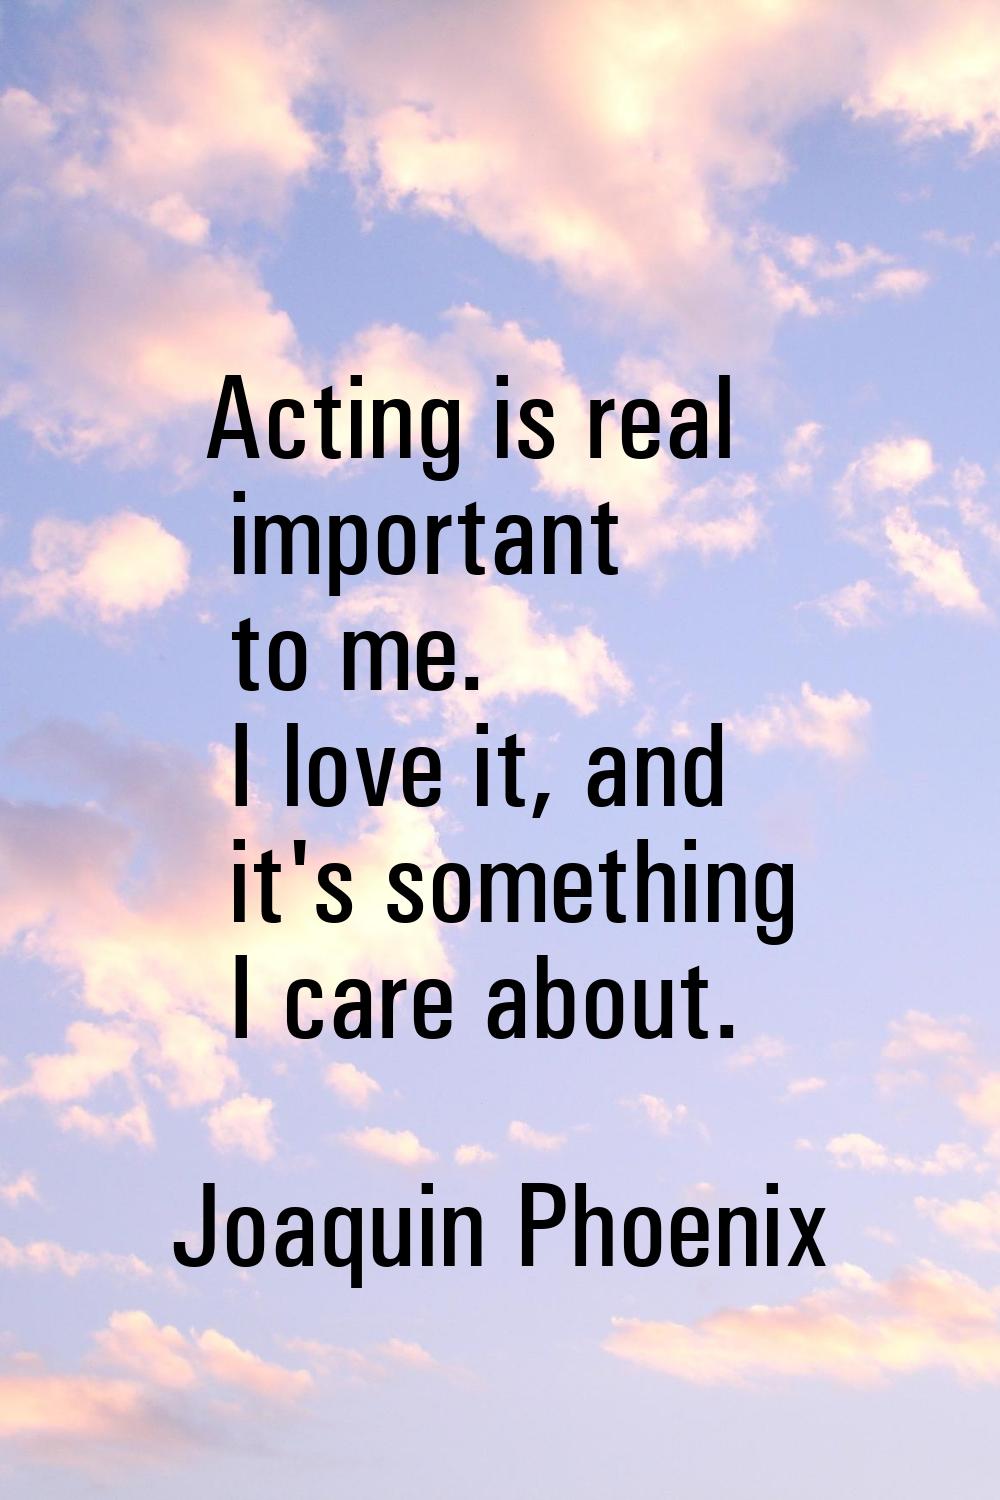 Acting is real important to me. I love it, and it's something I care about.